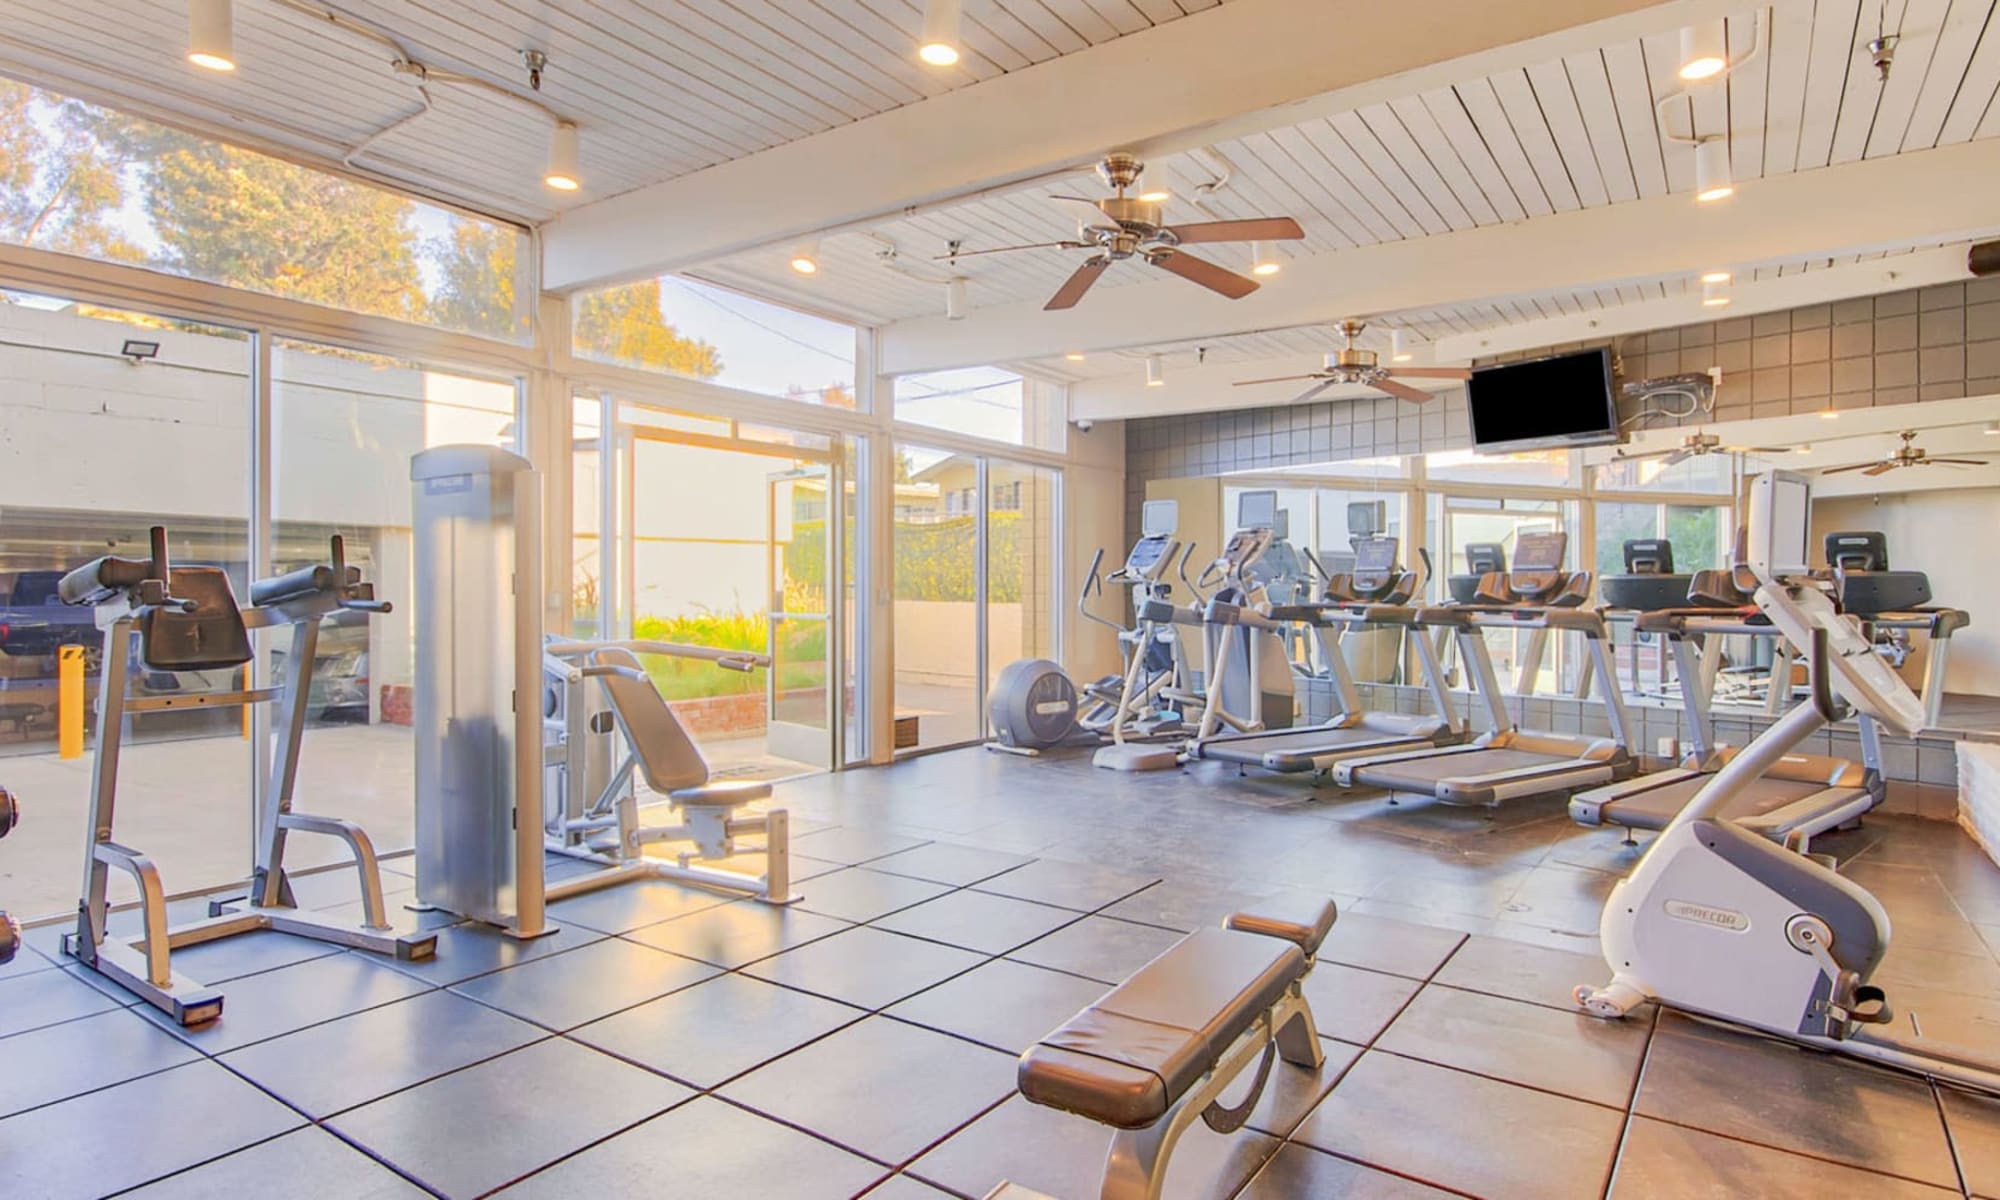 Well-equipped fitness center at Villa Vicente in Los Angeles, California